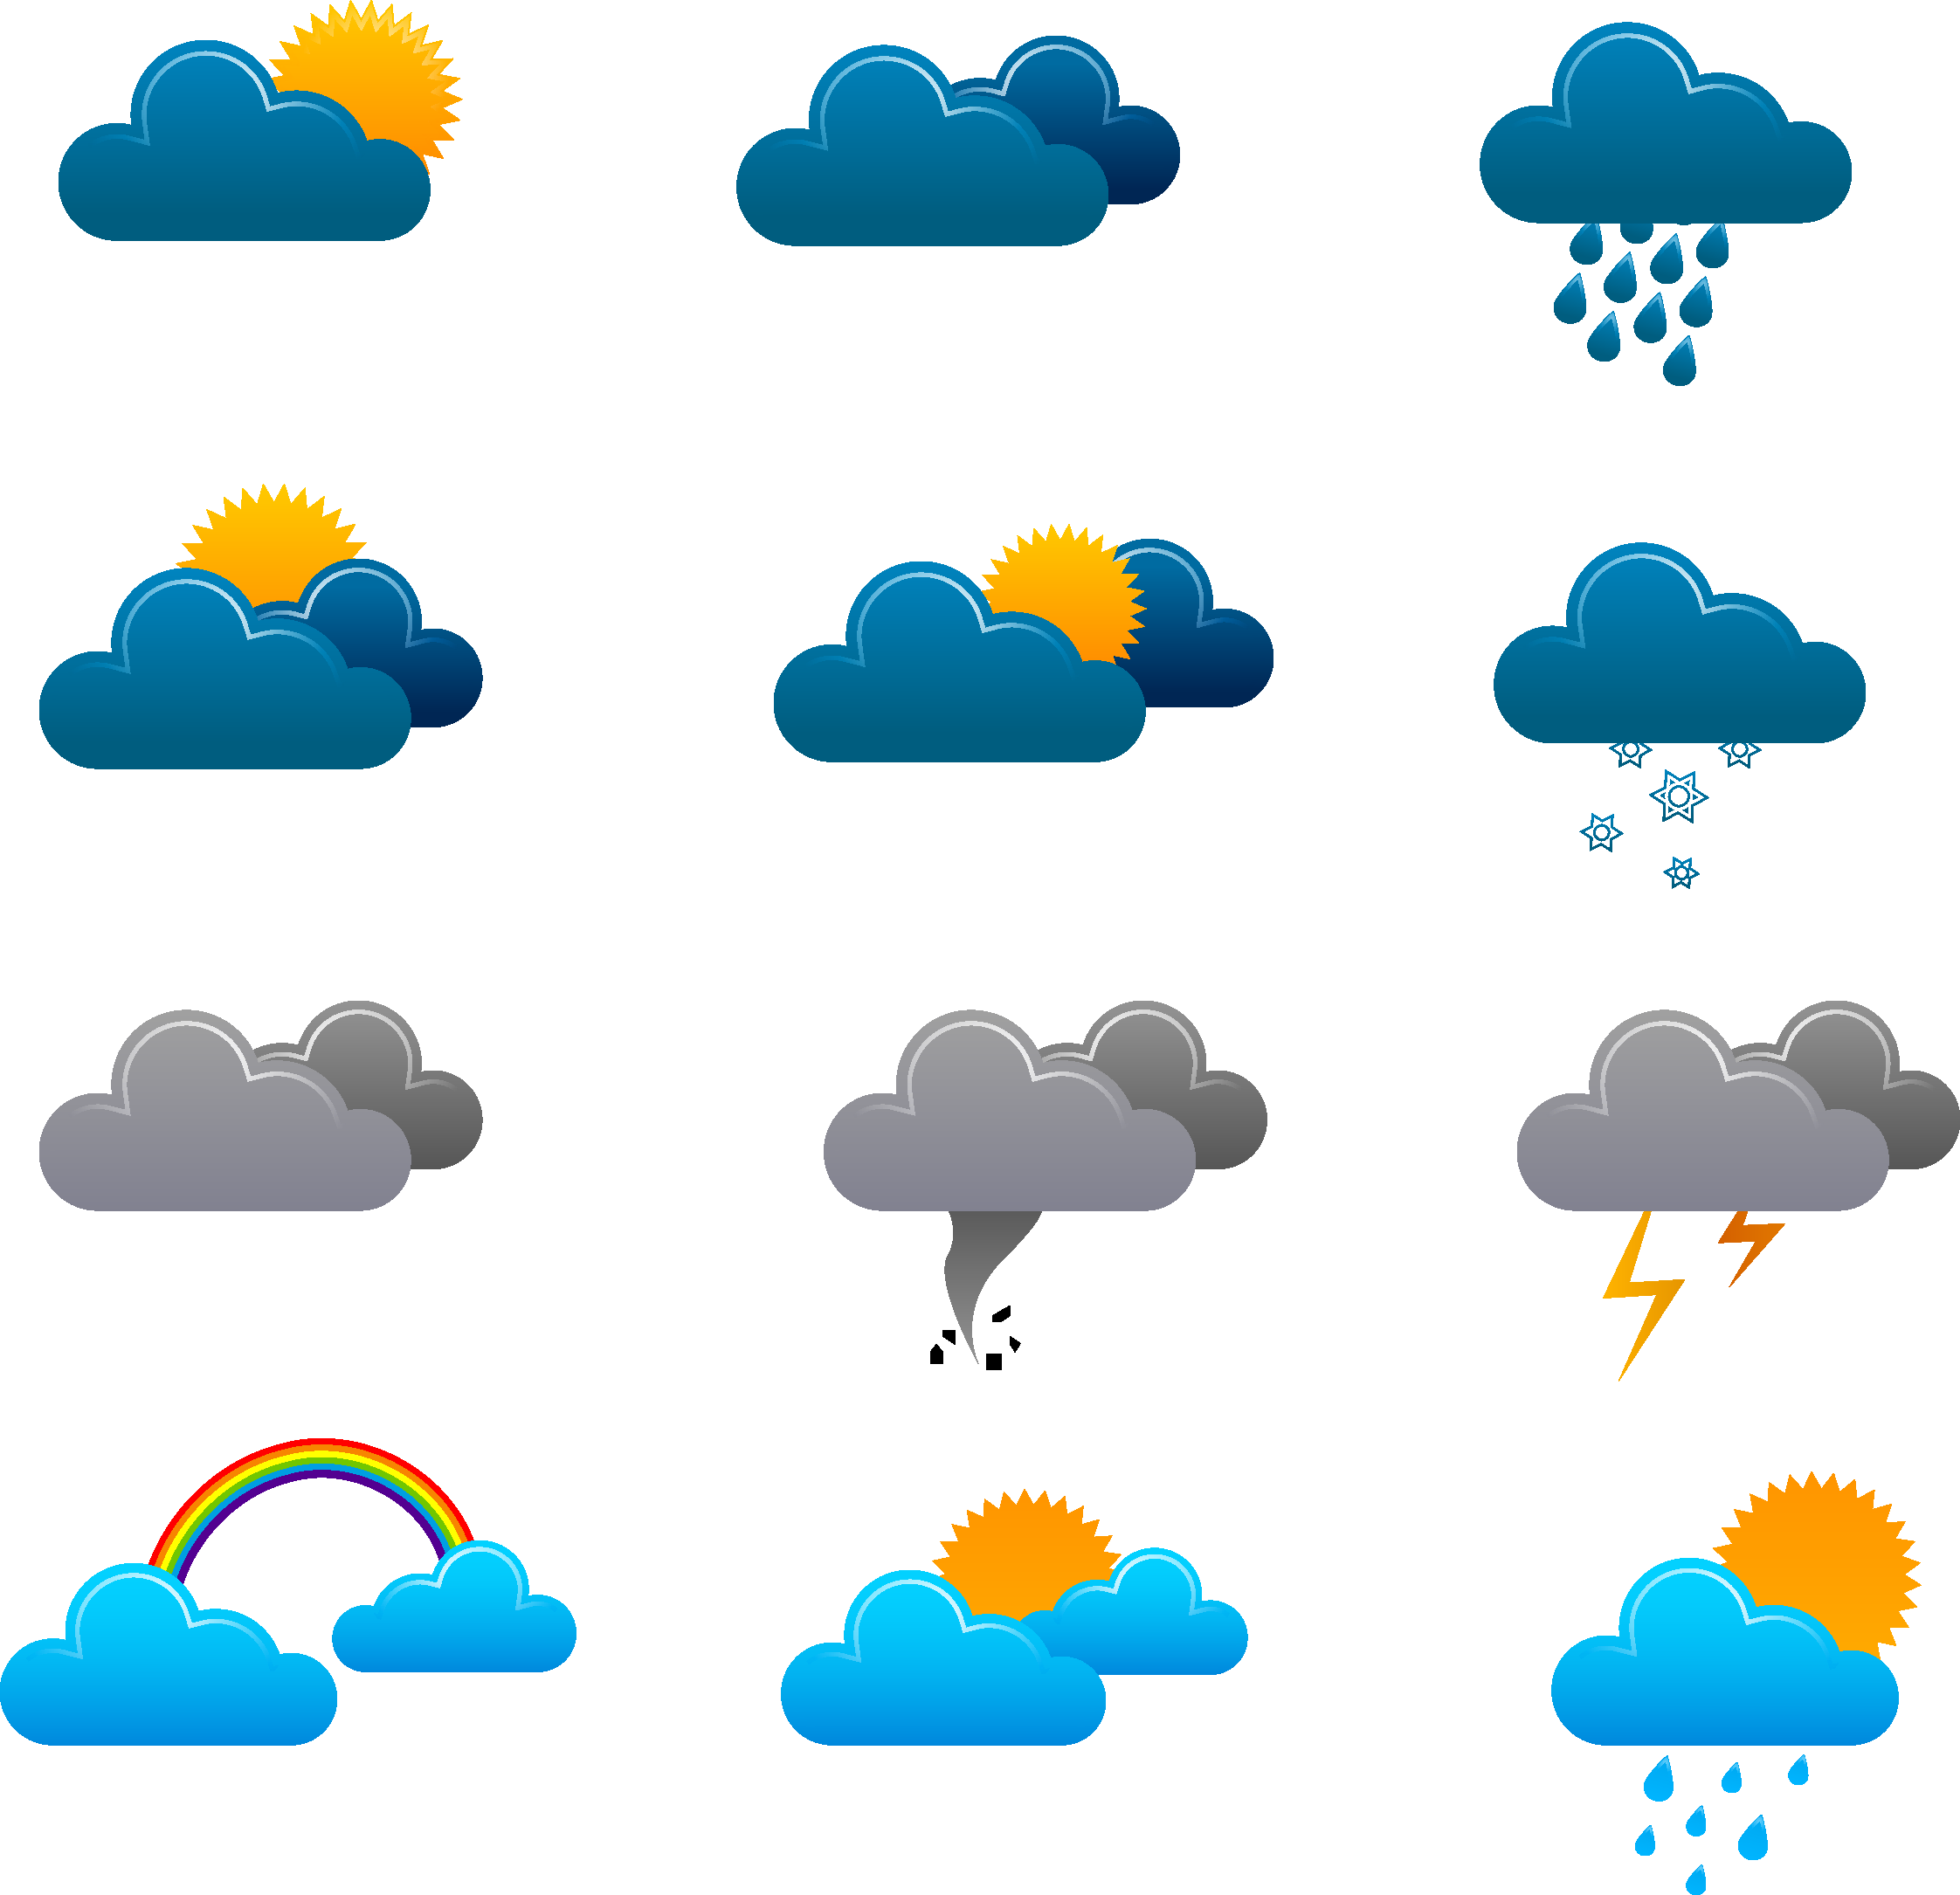 thunderstorm clipart weather report